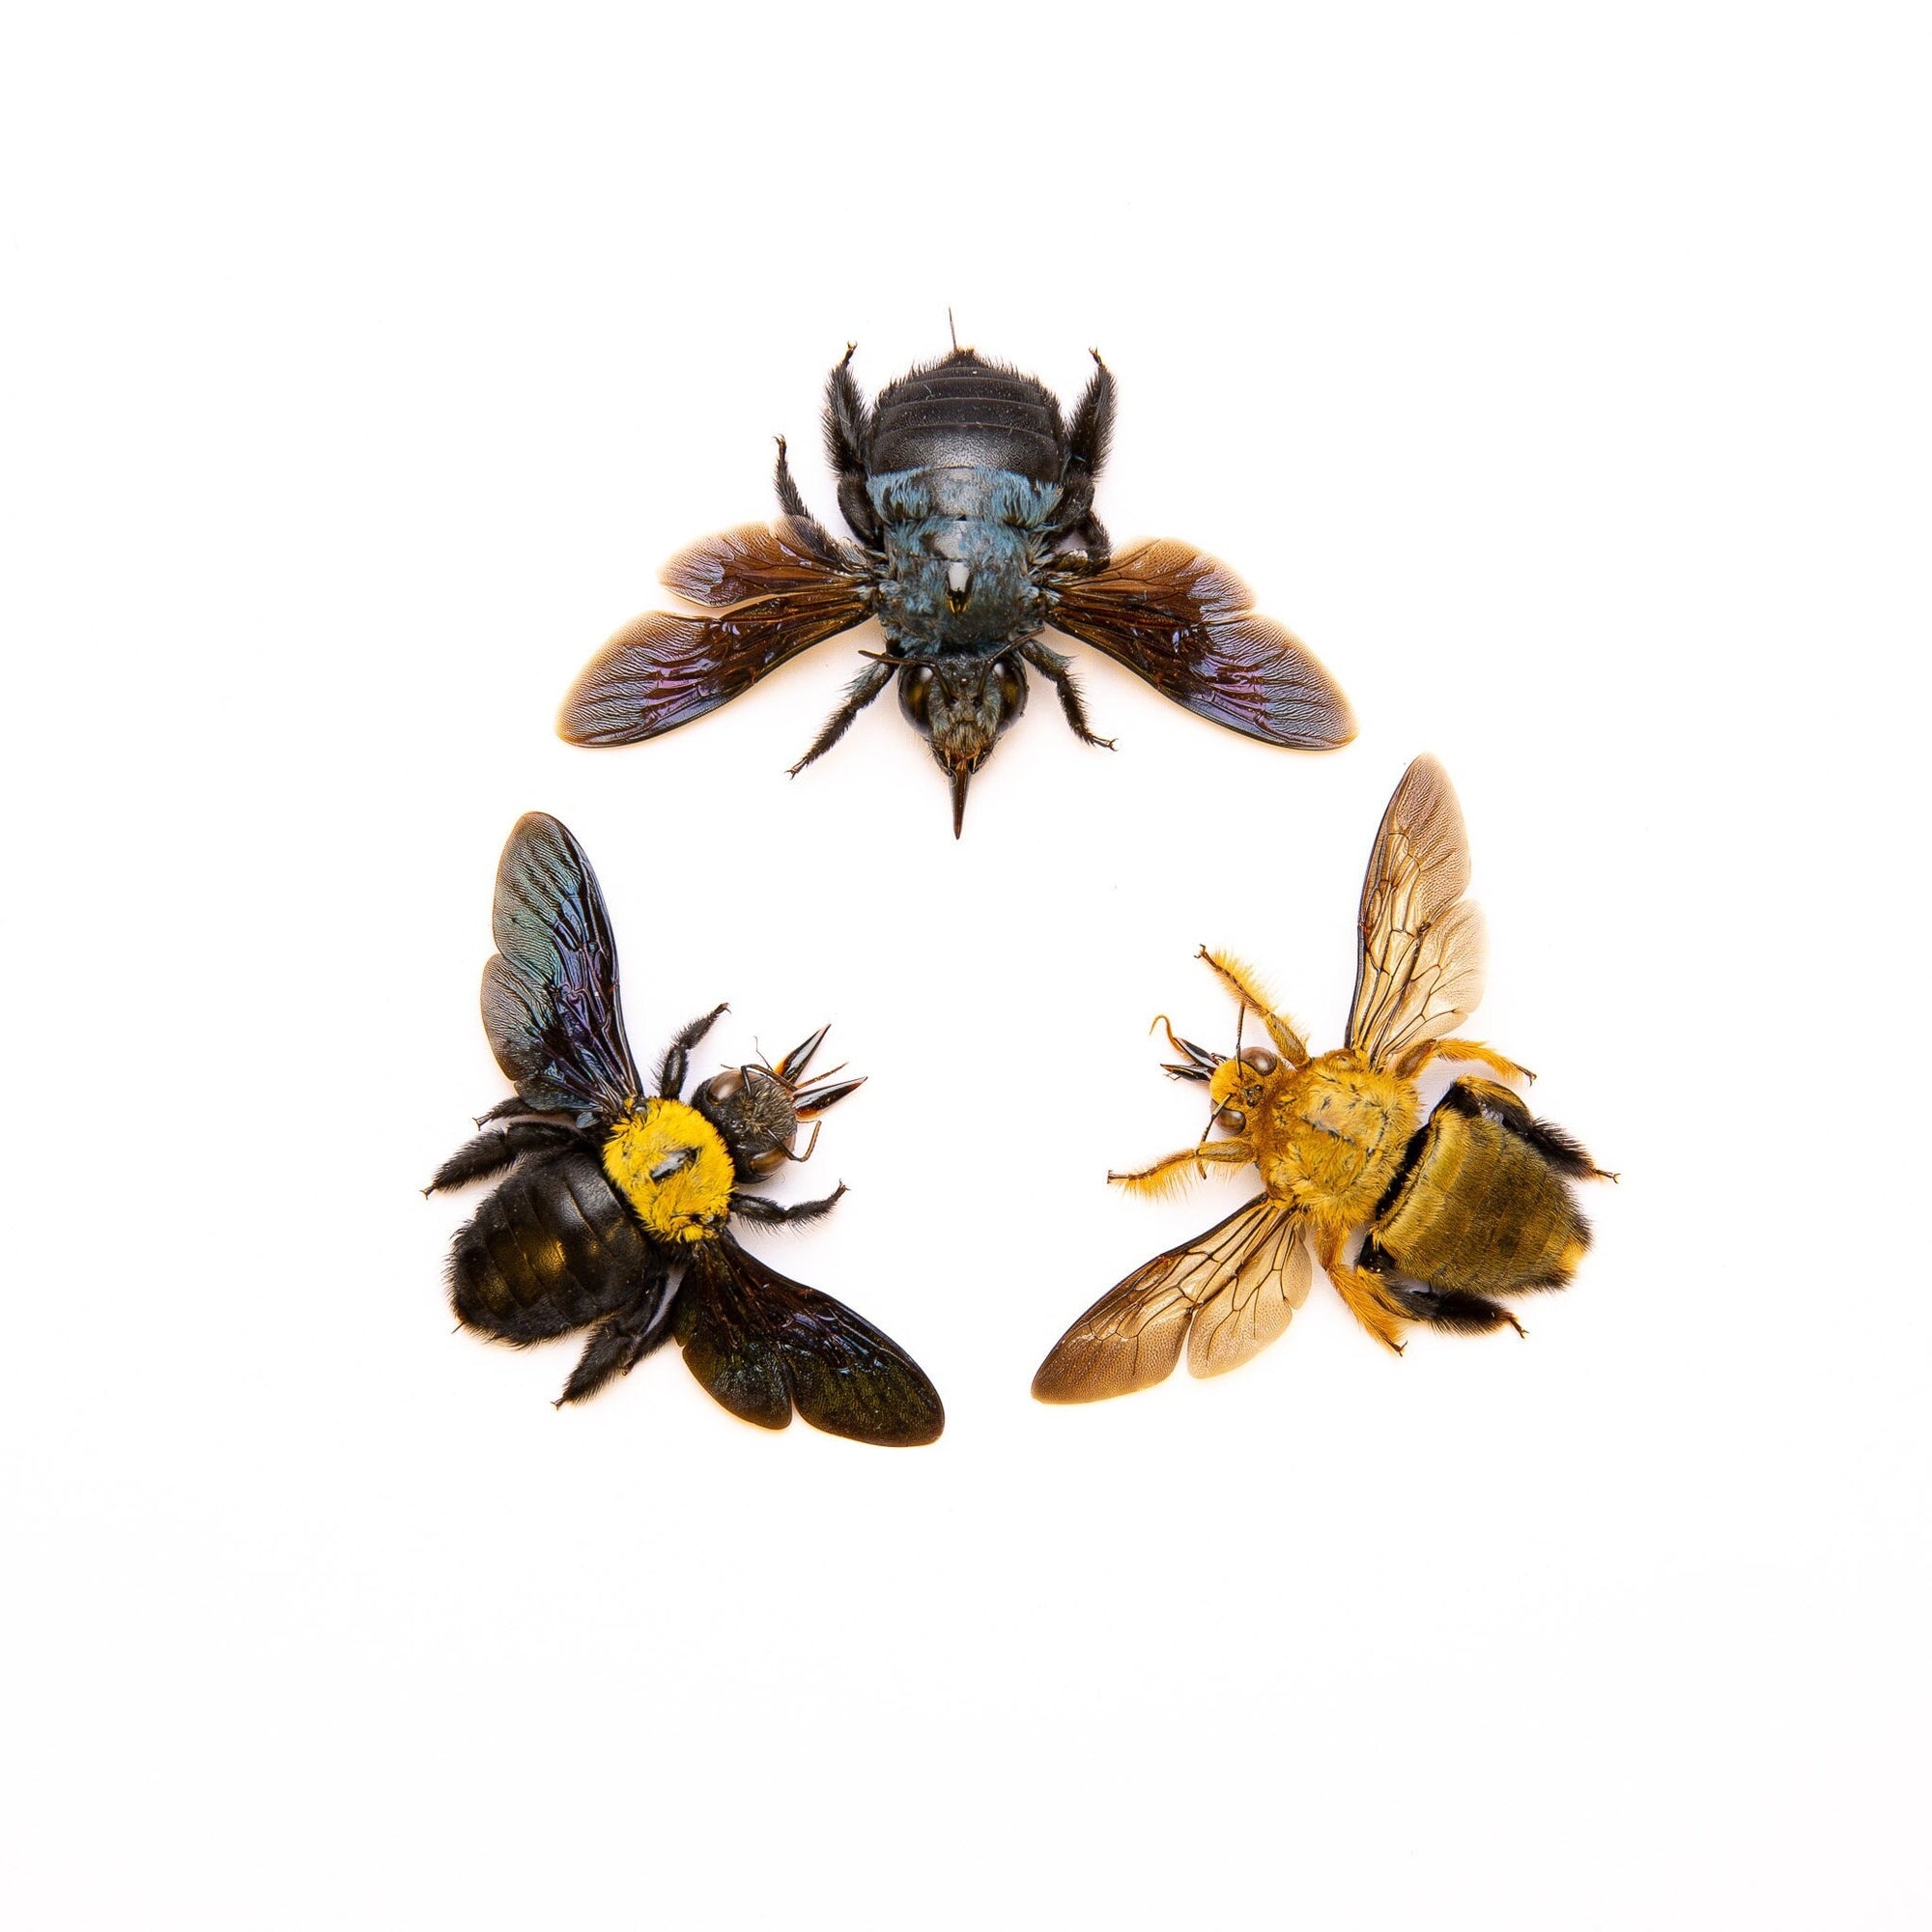 THREE (3) Carpenter Bee Collection (Xylocopa aestuans / caerulea) | A1 Spread Specimens (Pack of 3)